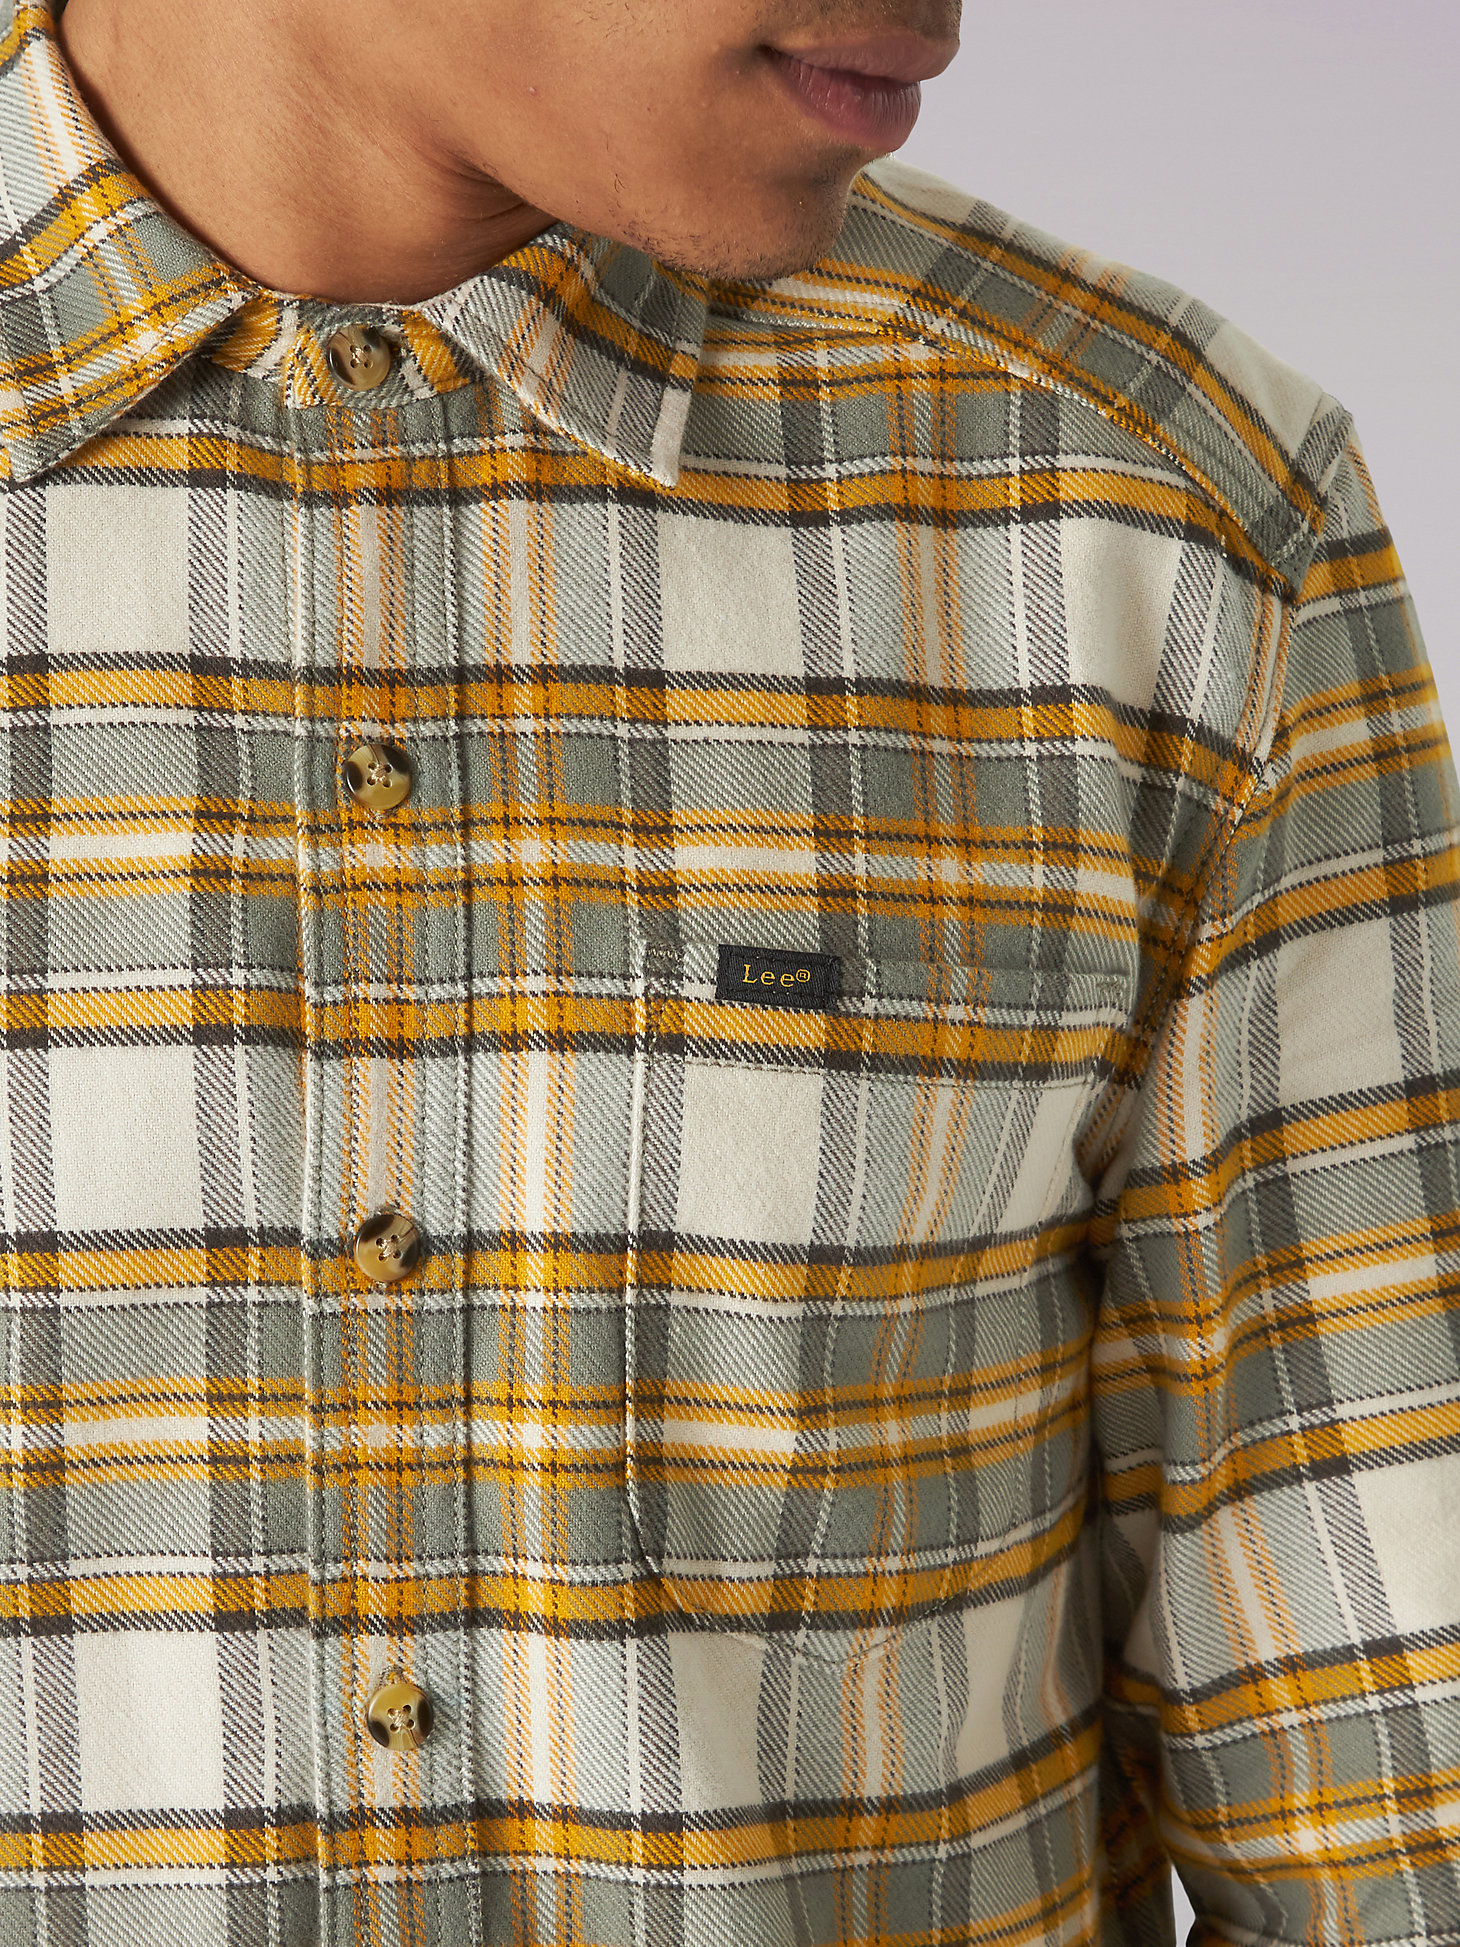 Men's Heritage Flannel Plaid Button Down Shirt in Yellow Grey Flannel alternative view 2